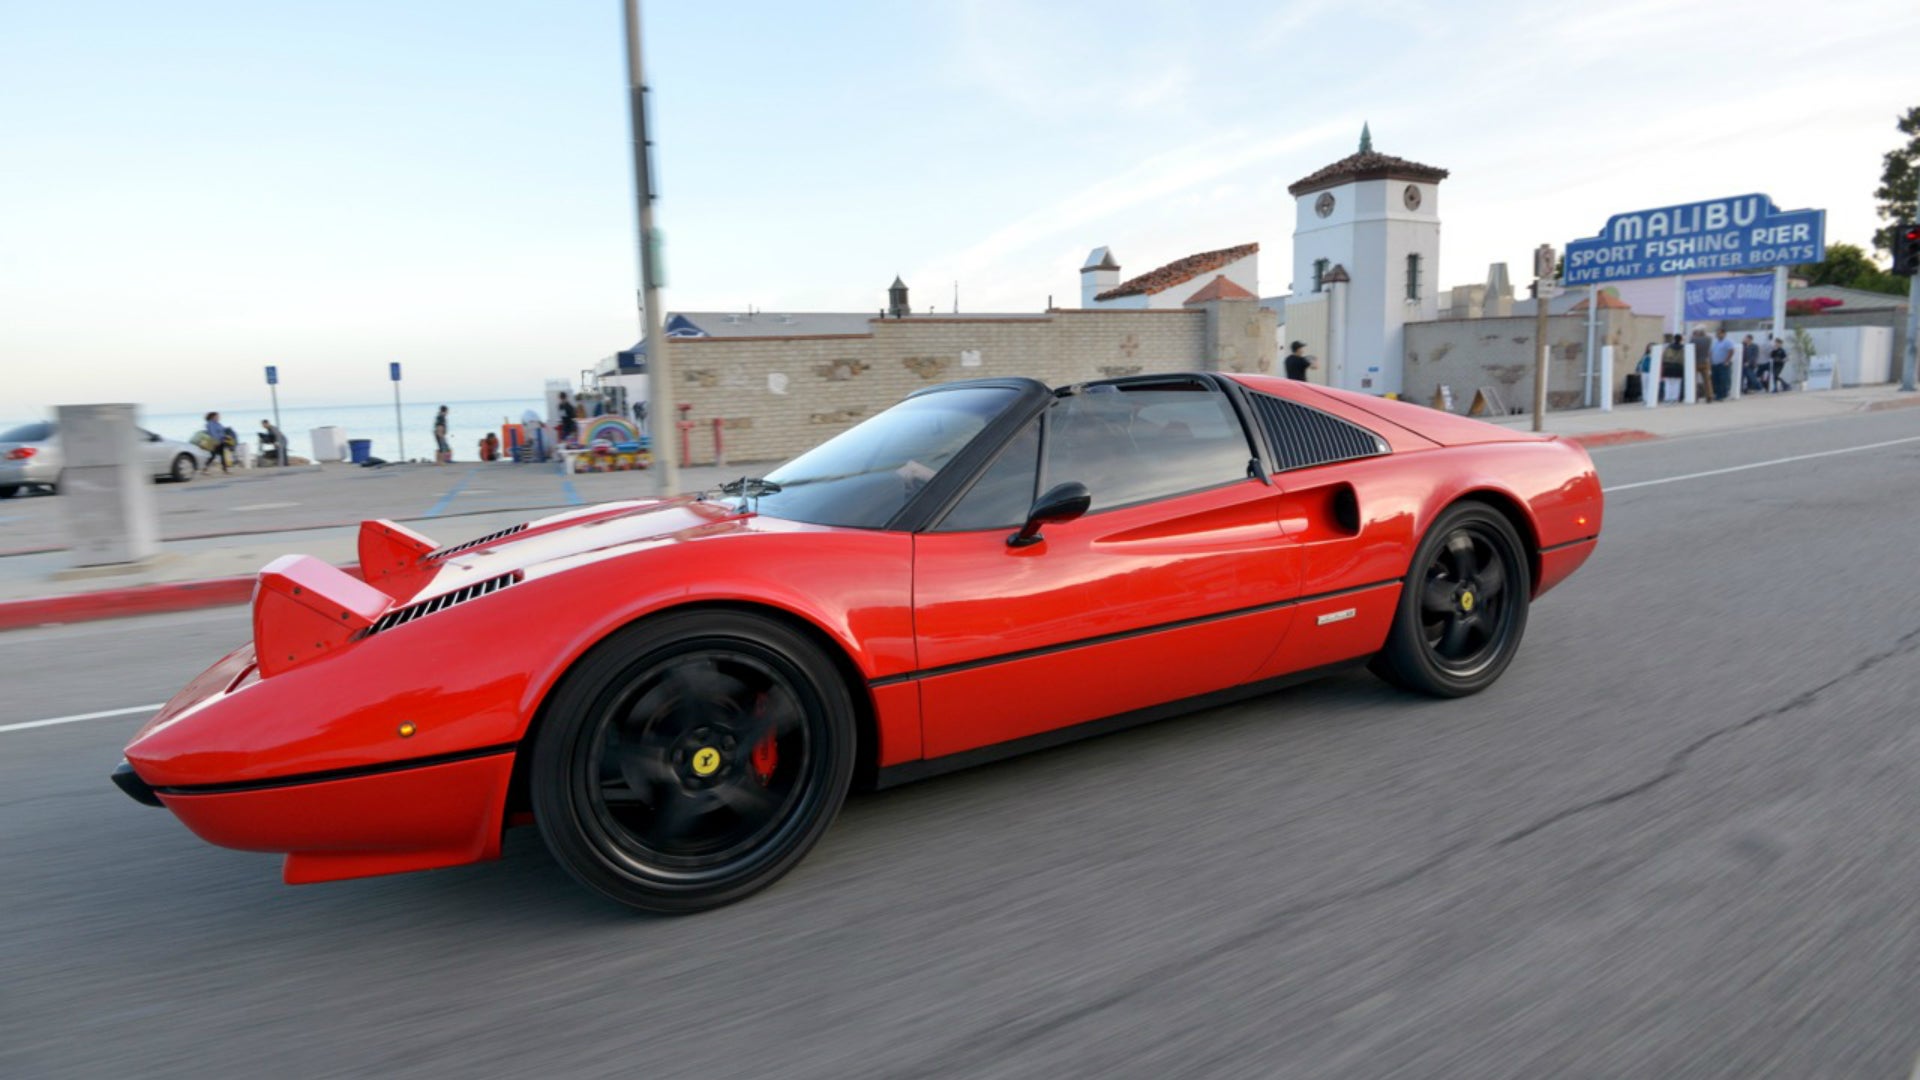 The World’s First Electric Ferrari is for Sale